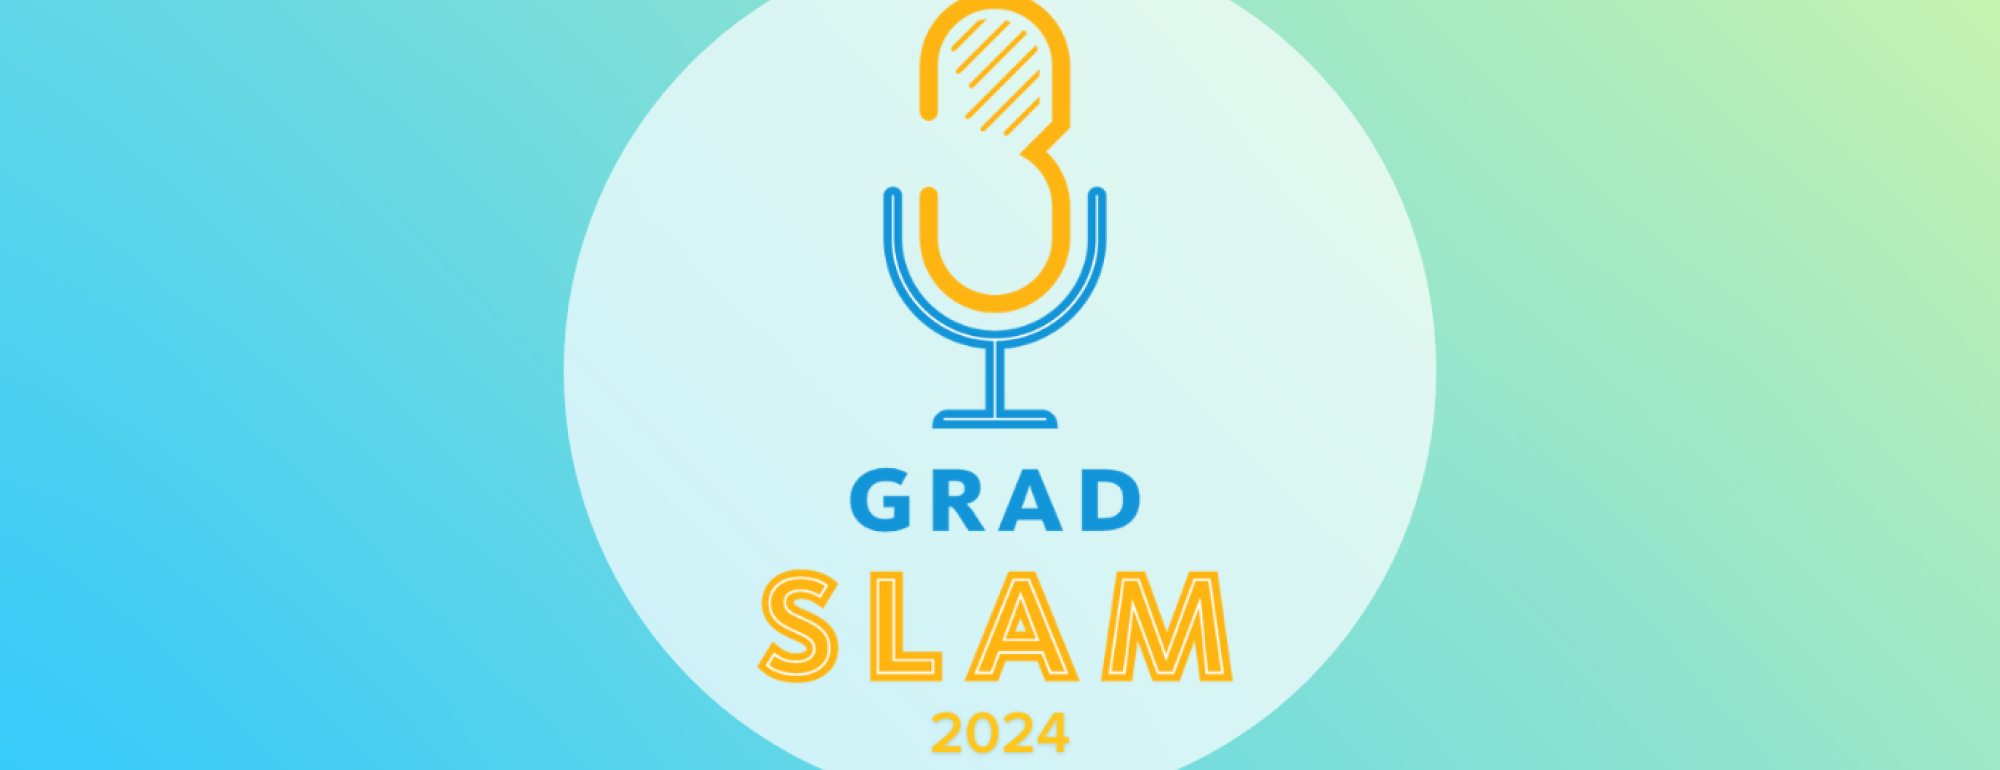 Grad Slam web banner showing an old fashion microphone